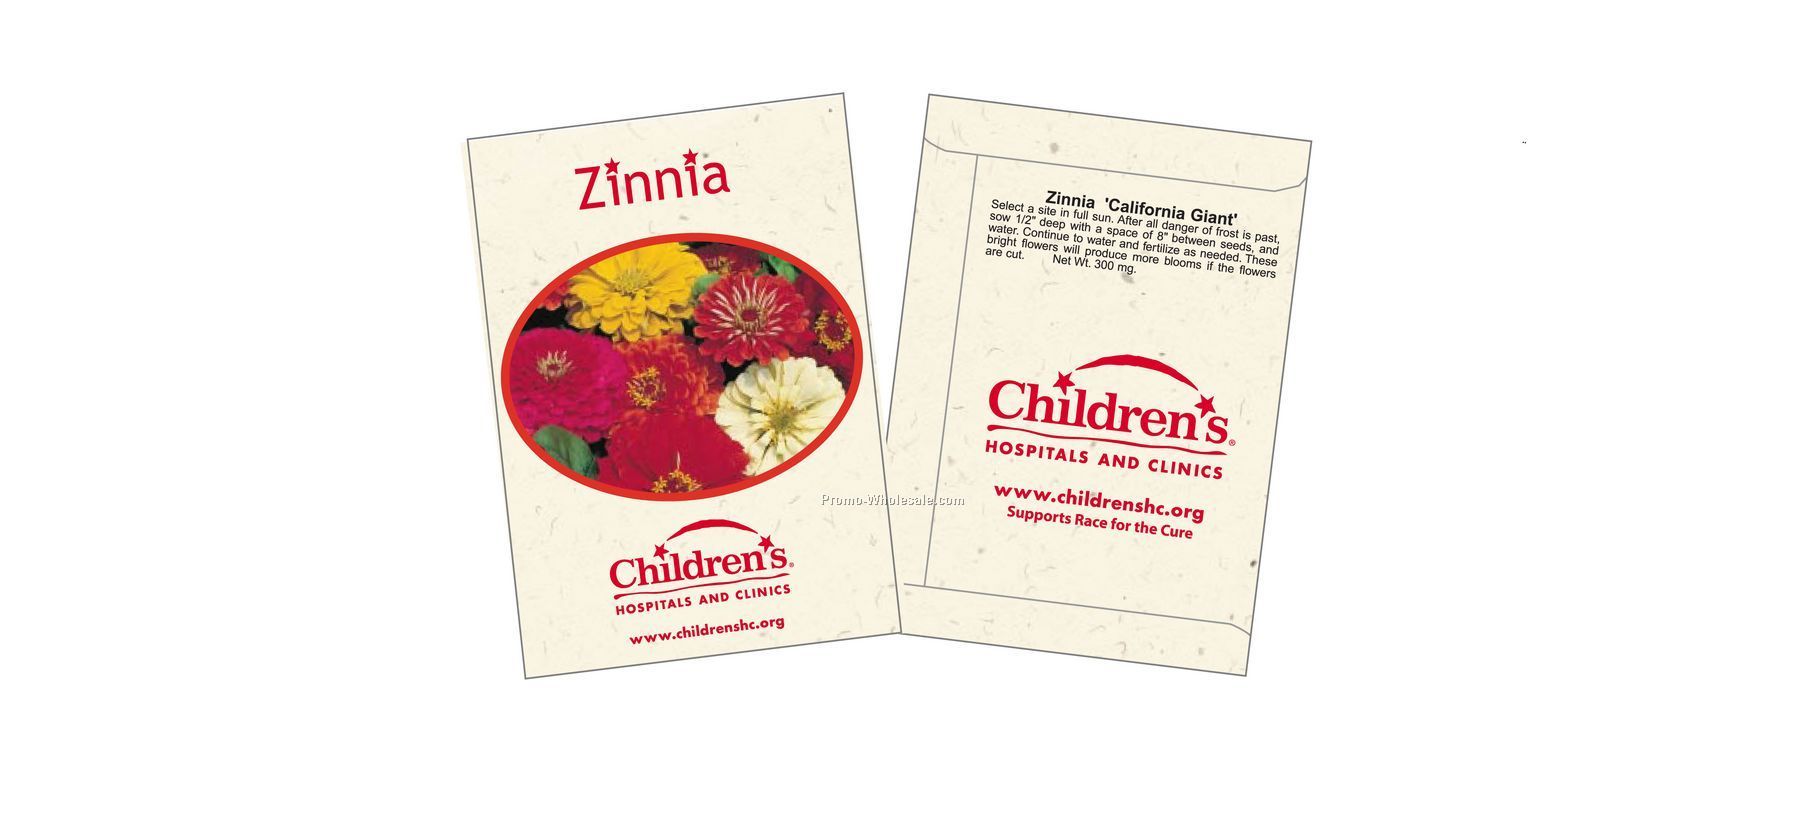 3-1/4"x4-1/2" Zinnia - California Giant - Flower Seed Packet (1 Color)